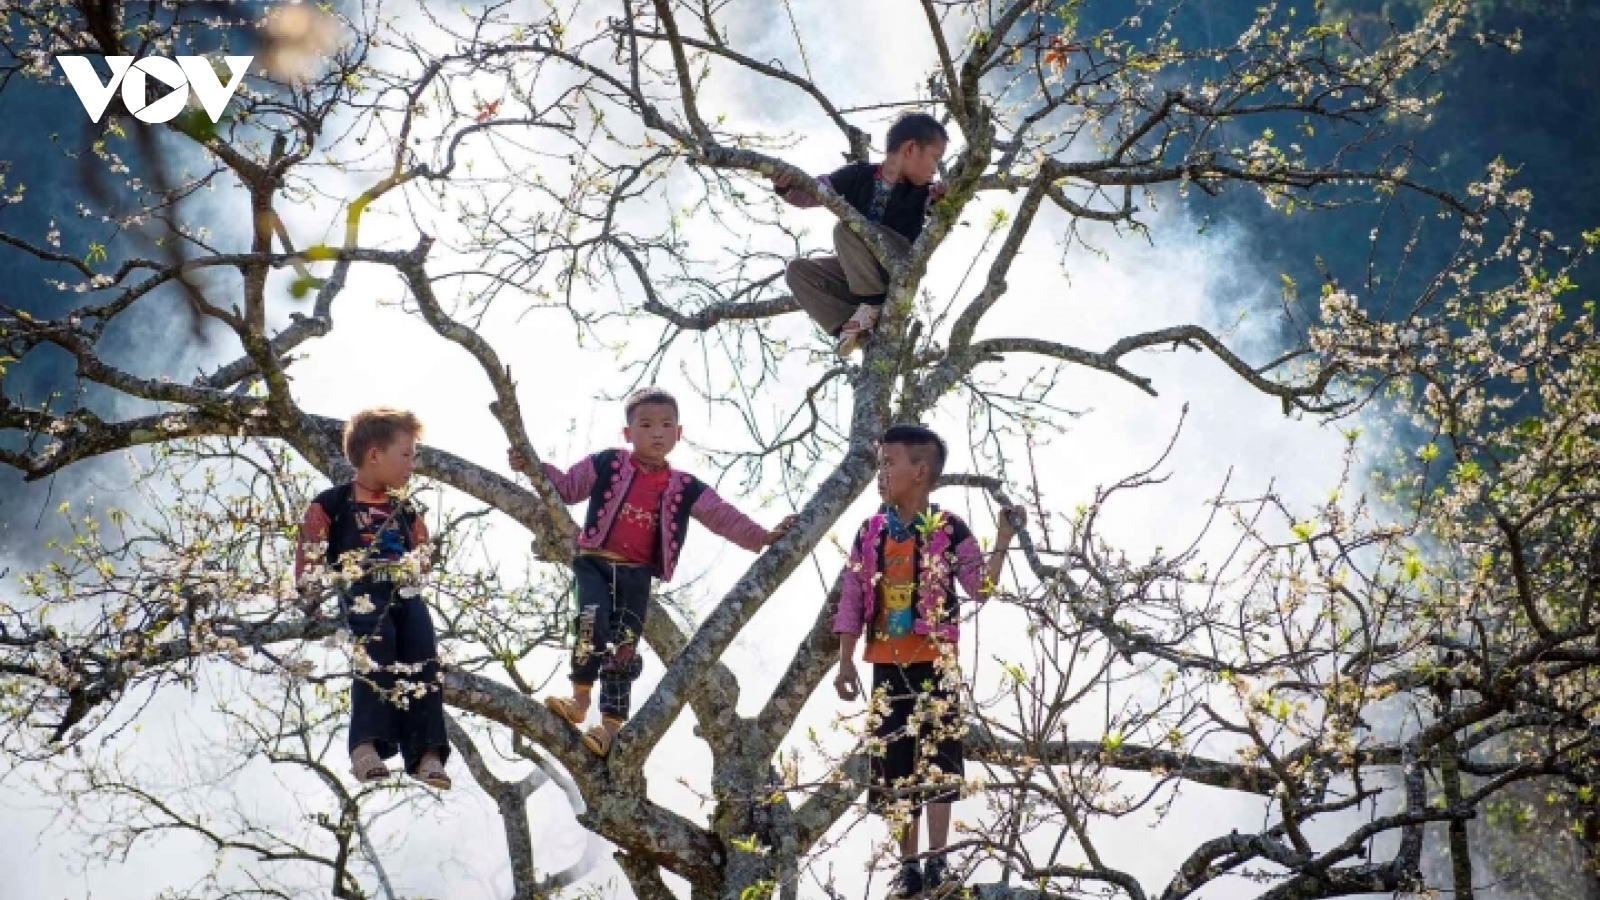 Highland children have fun in forest of white plum blossoms